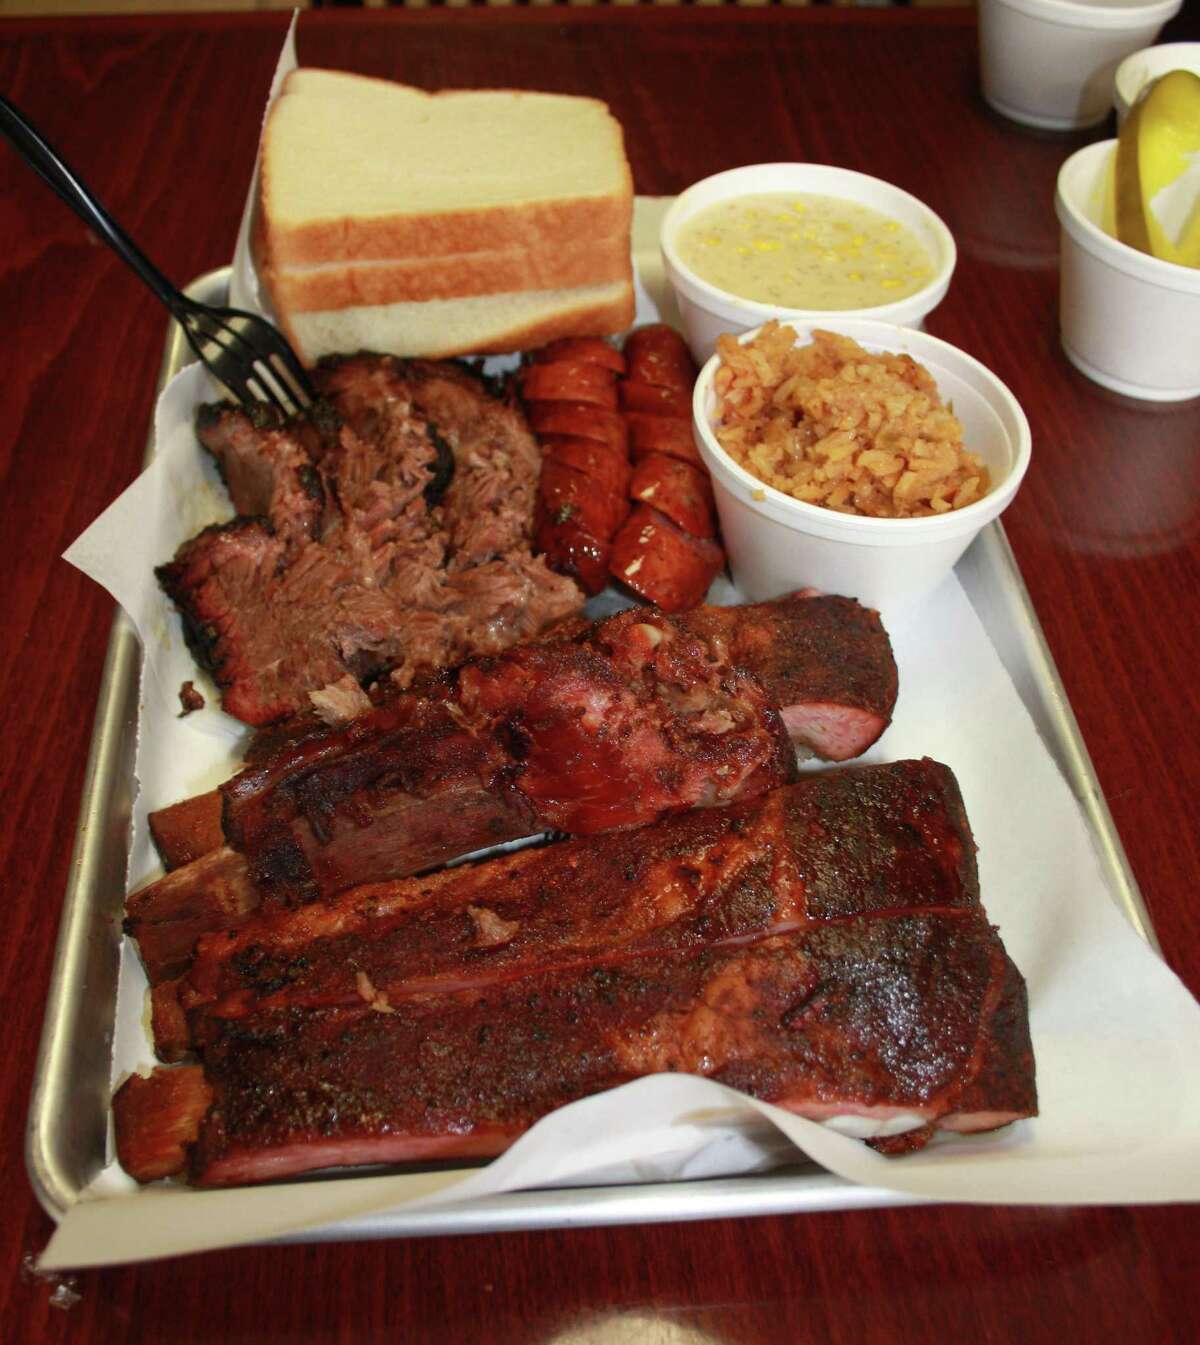 The El Monte BBQ menu keeps it simple with pork spare ribs, sausage and brisket as the only meat options. Sides include Spanish rice, creamed corn, potato salad and (not pictured) baked beans.